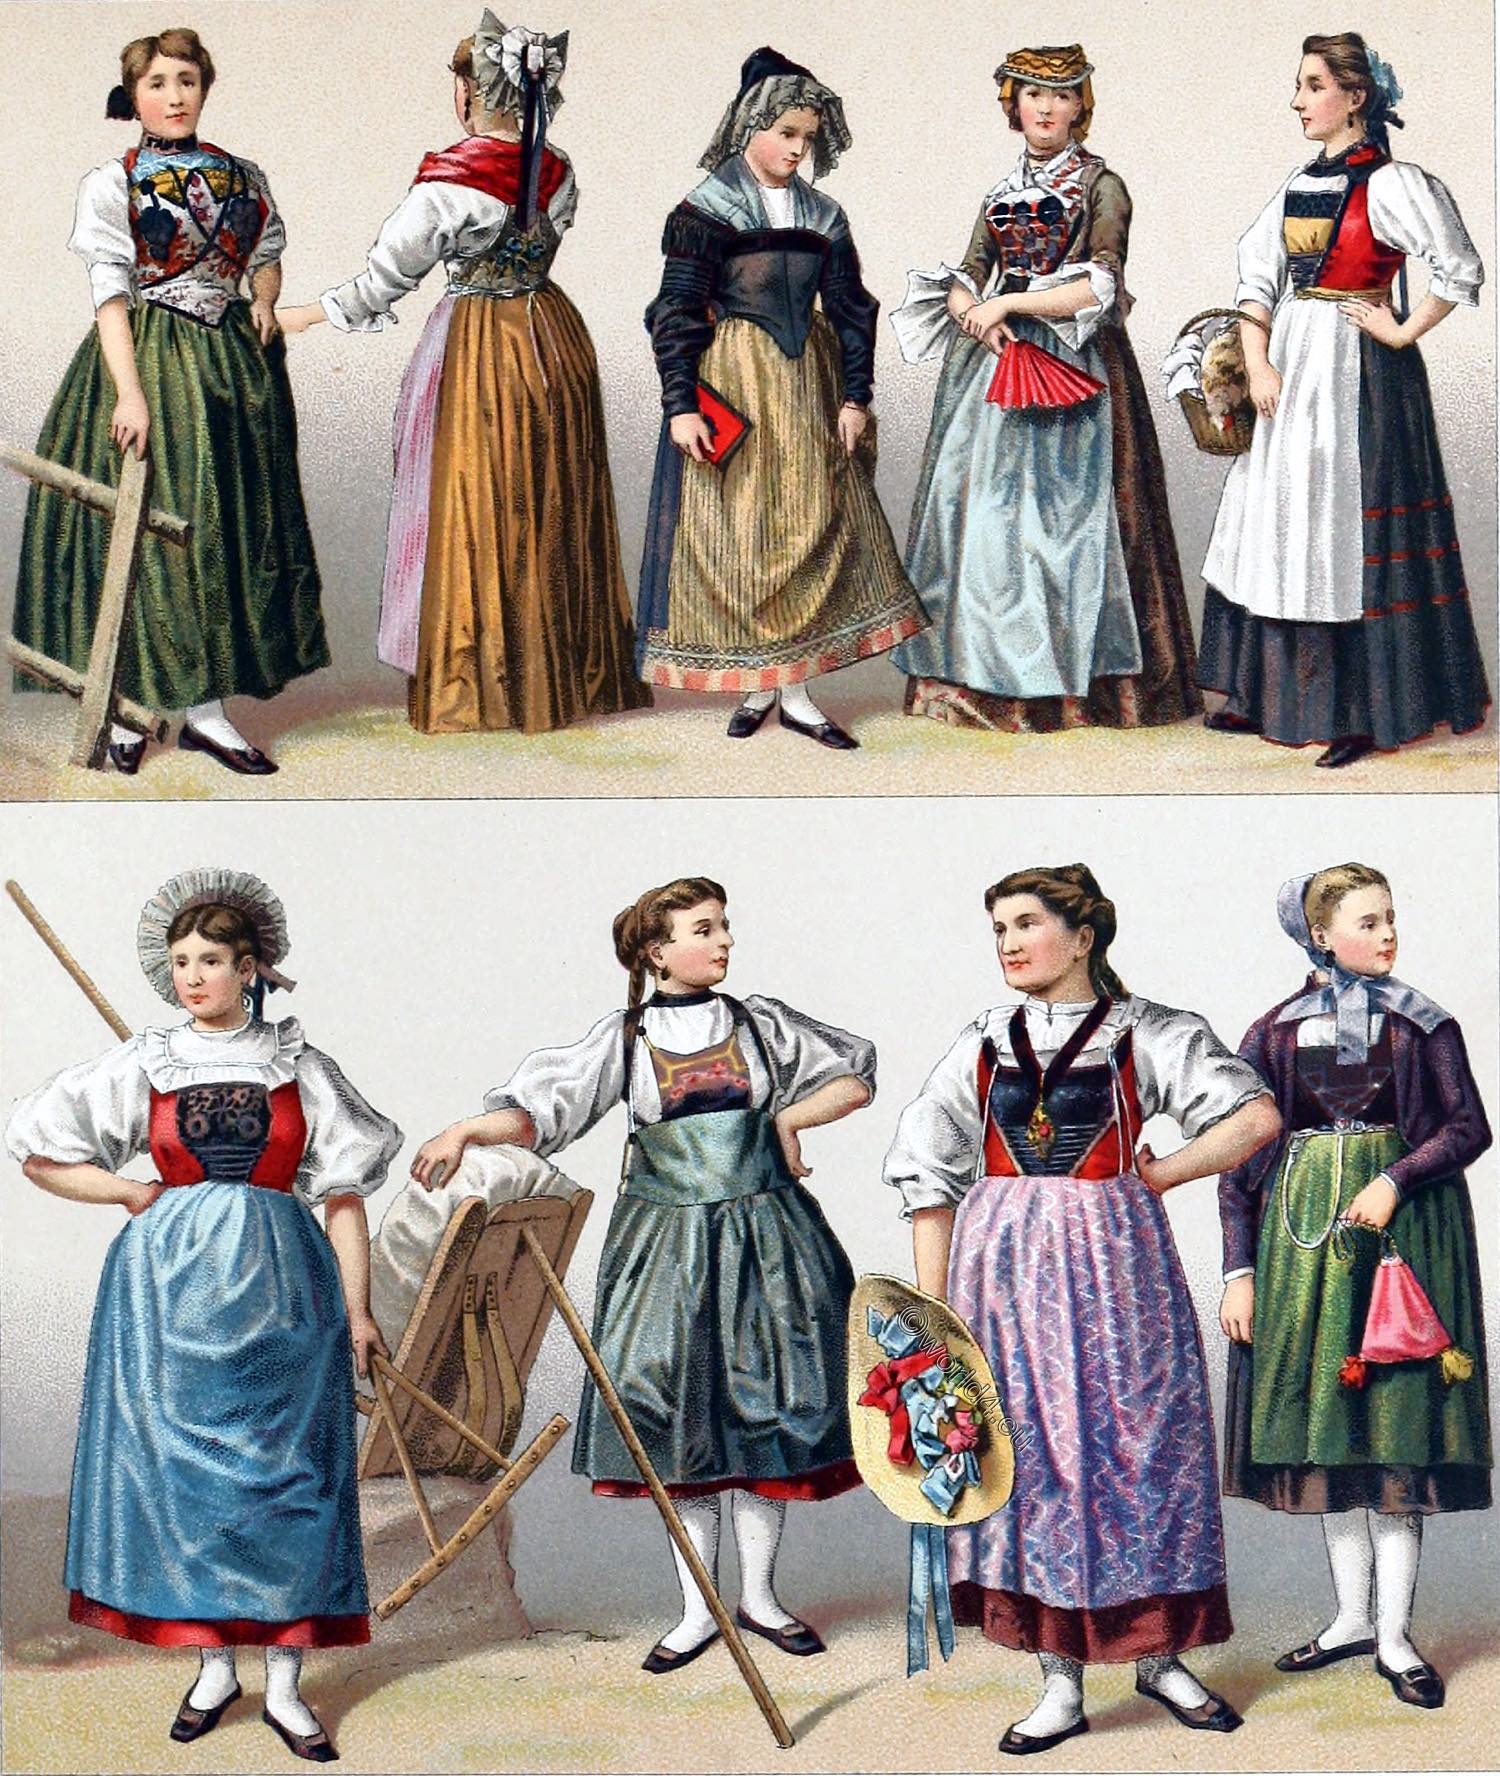 Women's costumes from the Swiss cantons at the end of the 19th century.